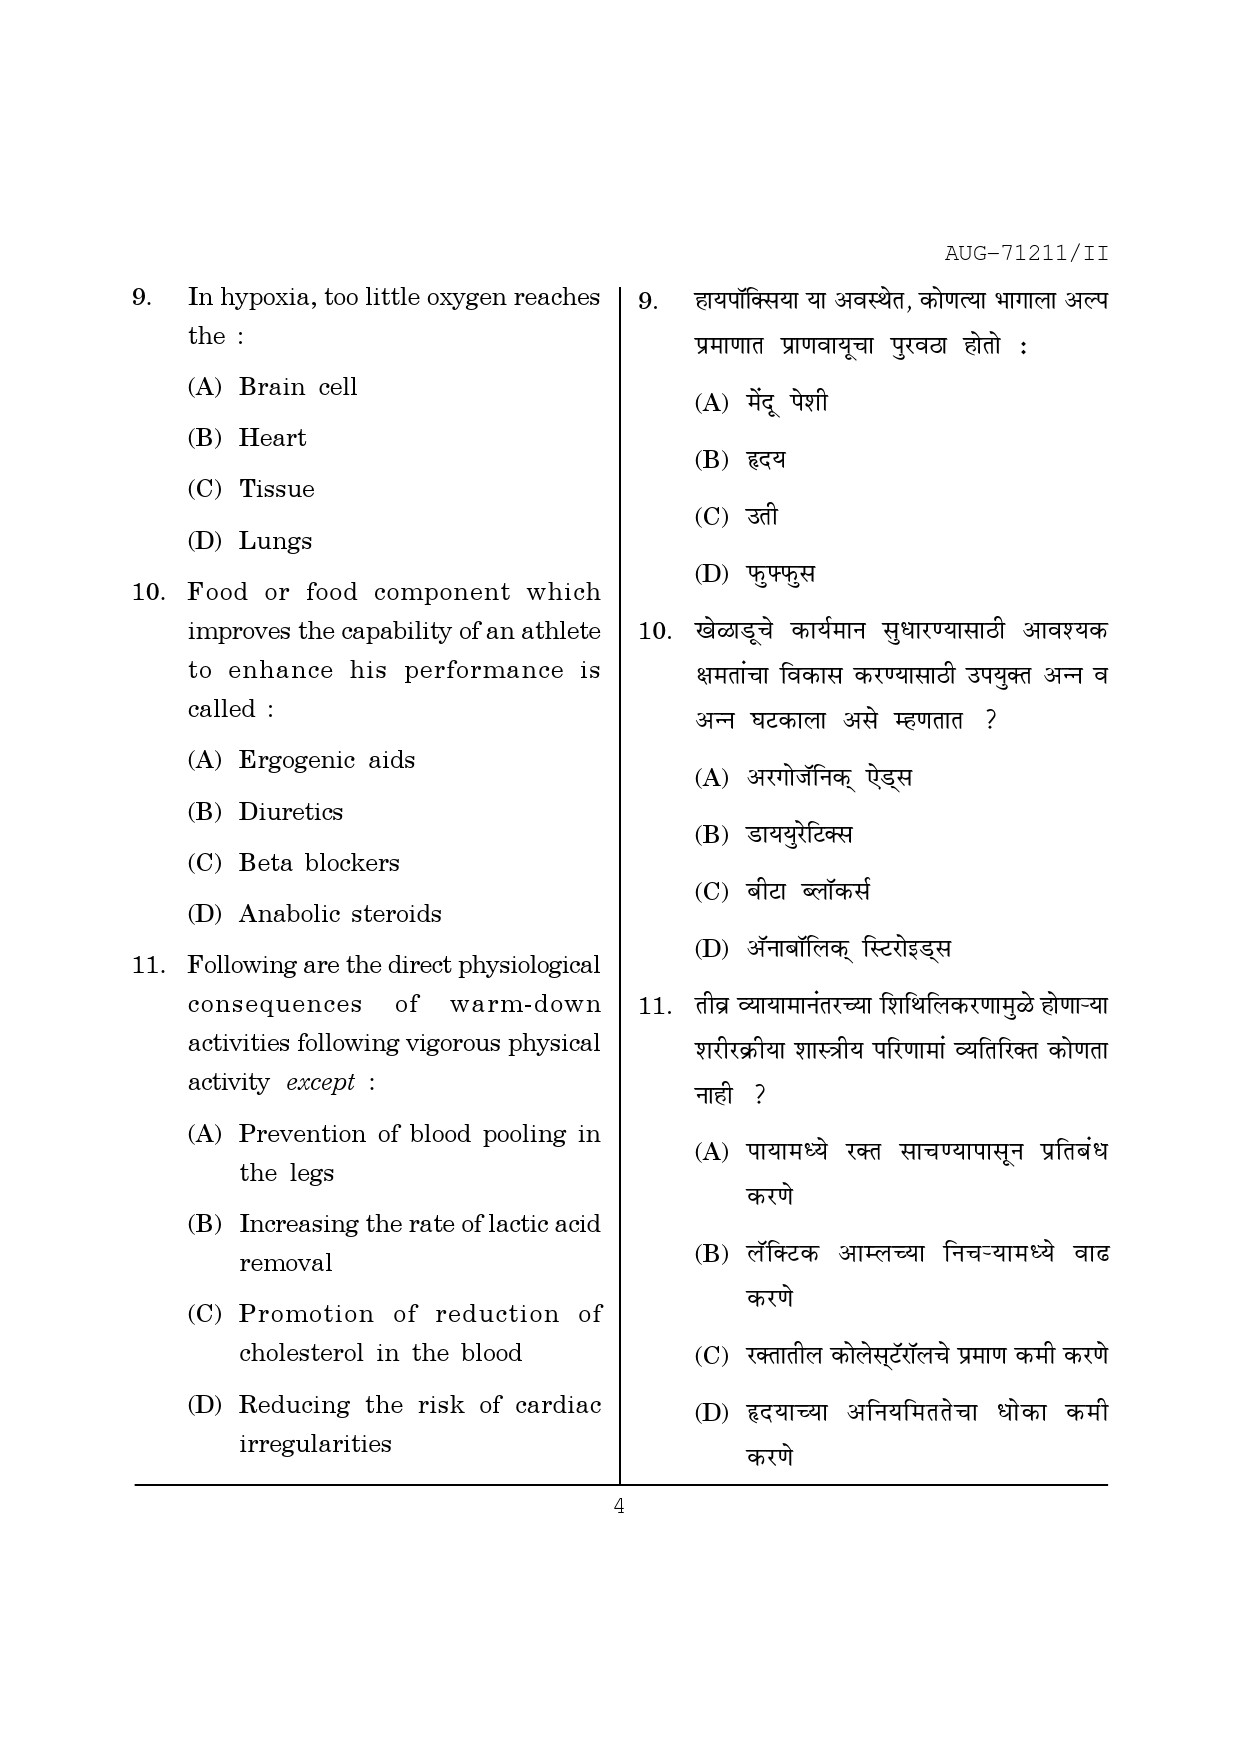 Maharashtra SET Physical Education Question Paper II August 2011 4